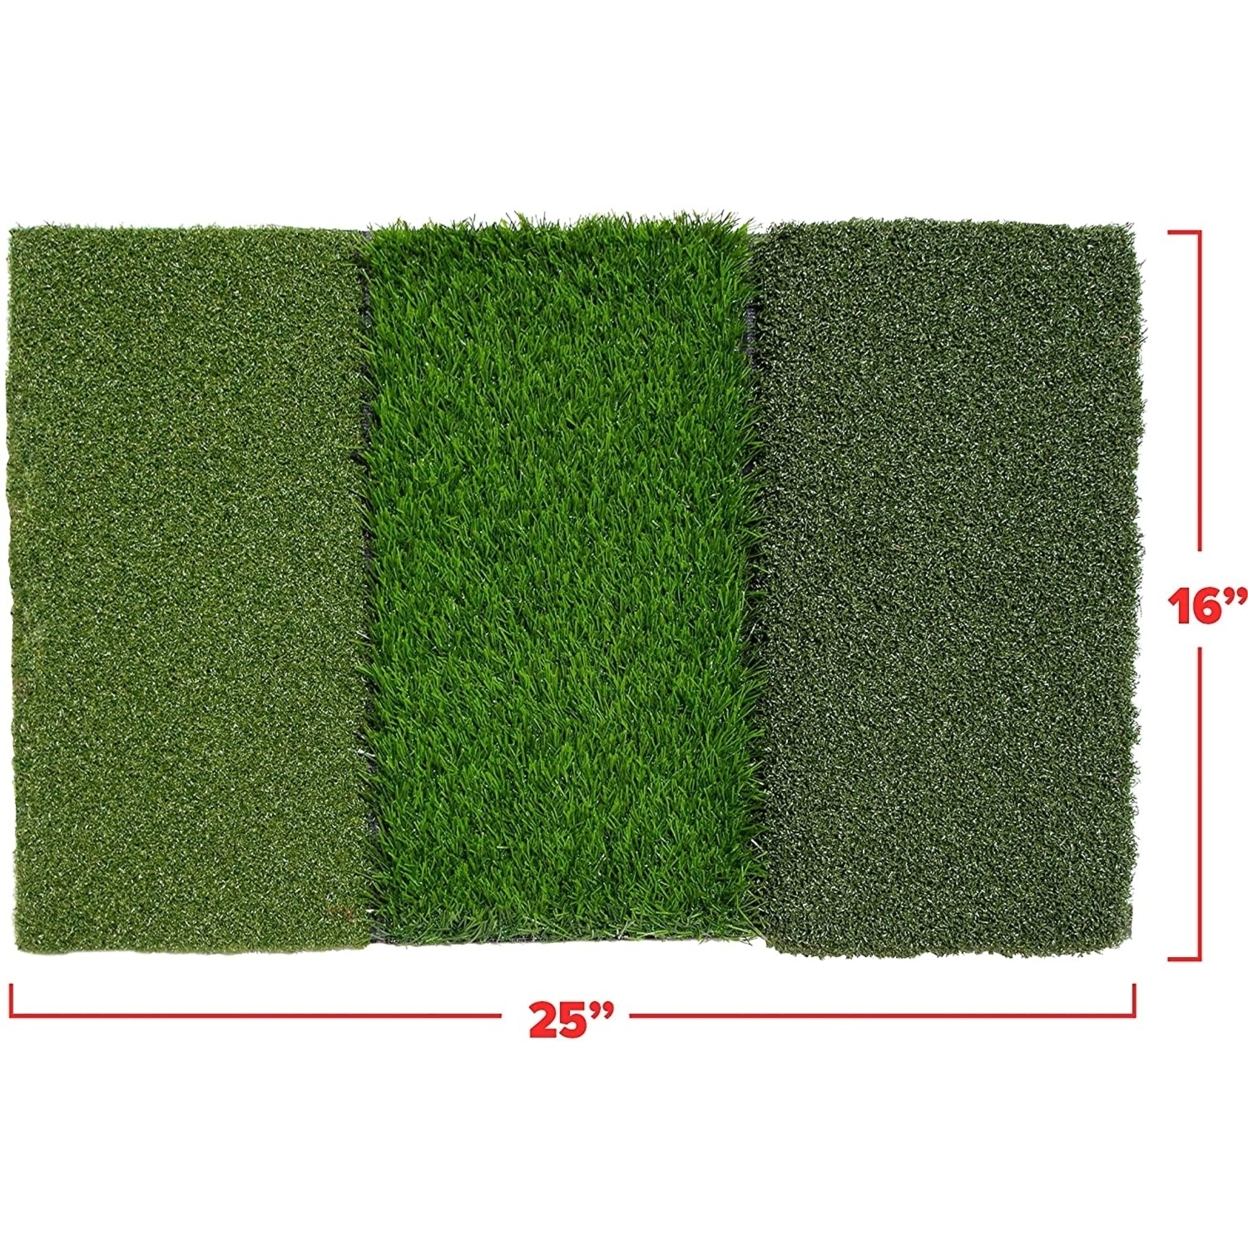 PowerNet Artificial Tri-Turf Grass Golf Hitting Practice Mat For Improving Your Swing (1159)